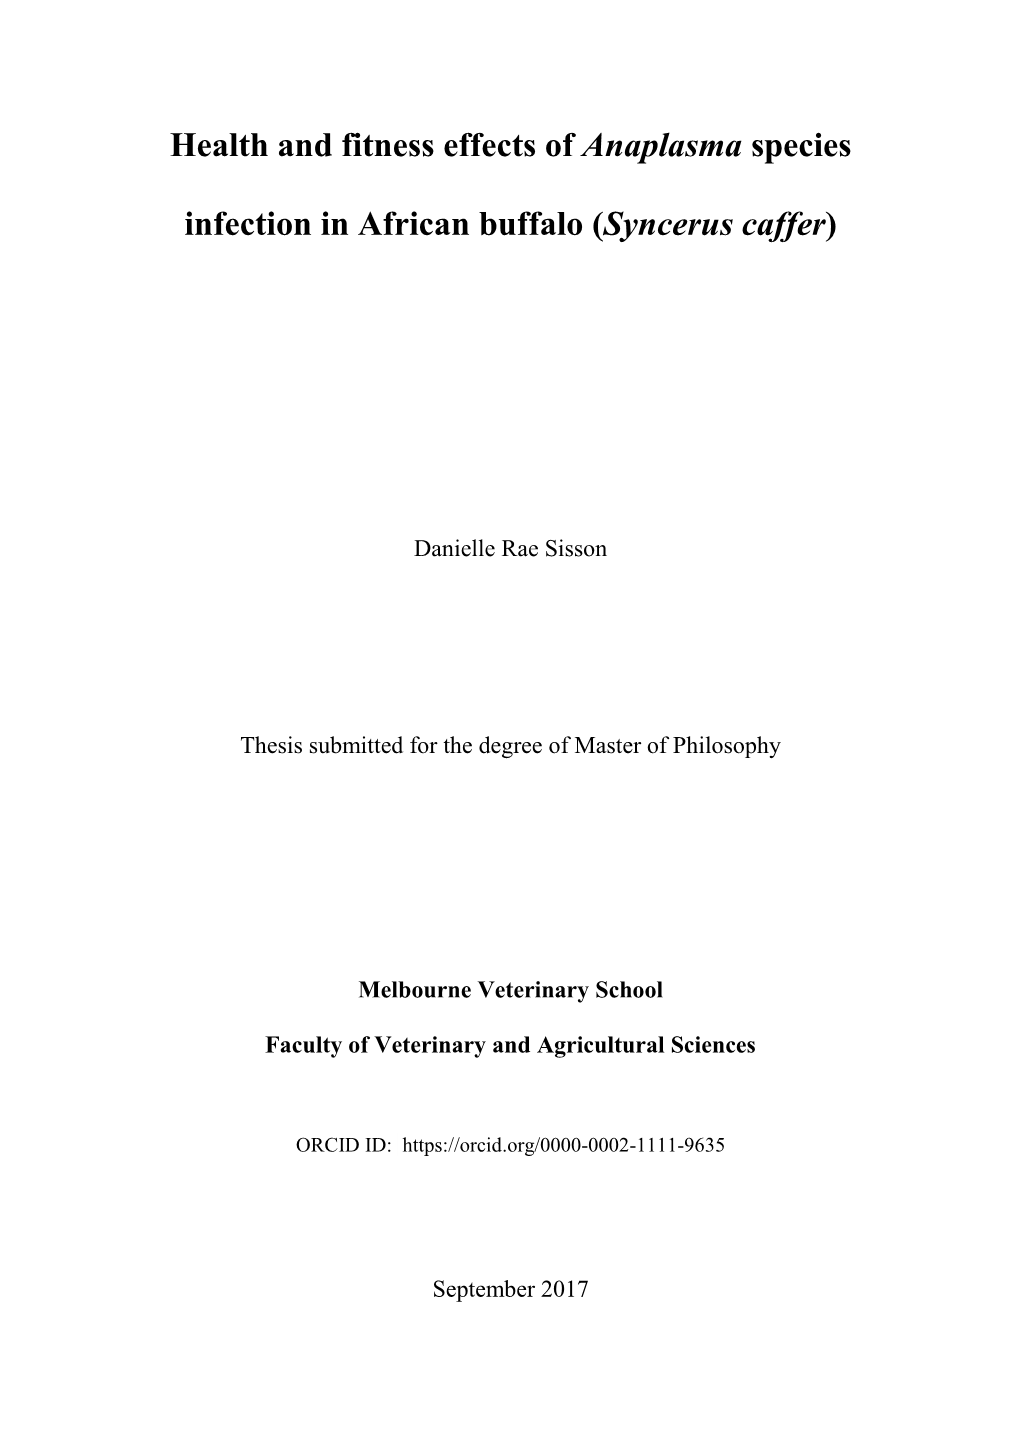 Health and Fitness Effects of Anaplasma Species Infection in African Buffalo (Syncerus Caffer)